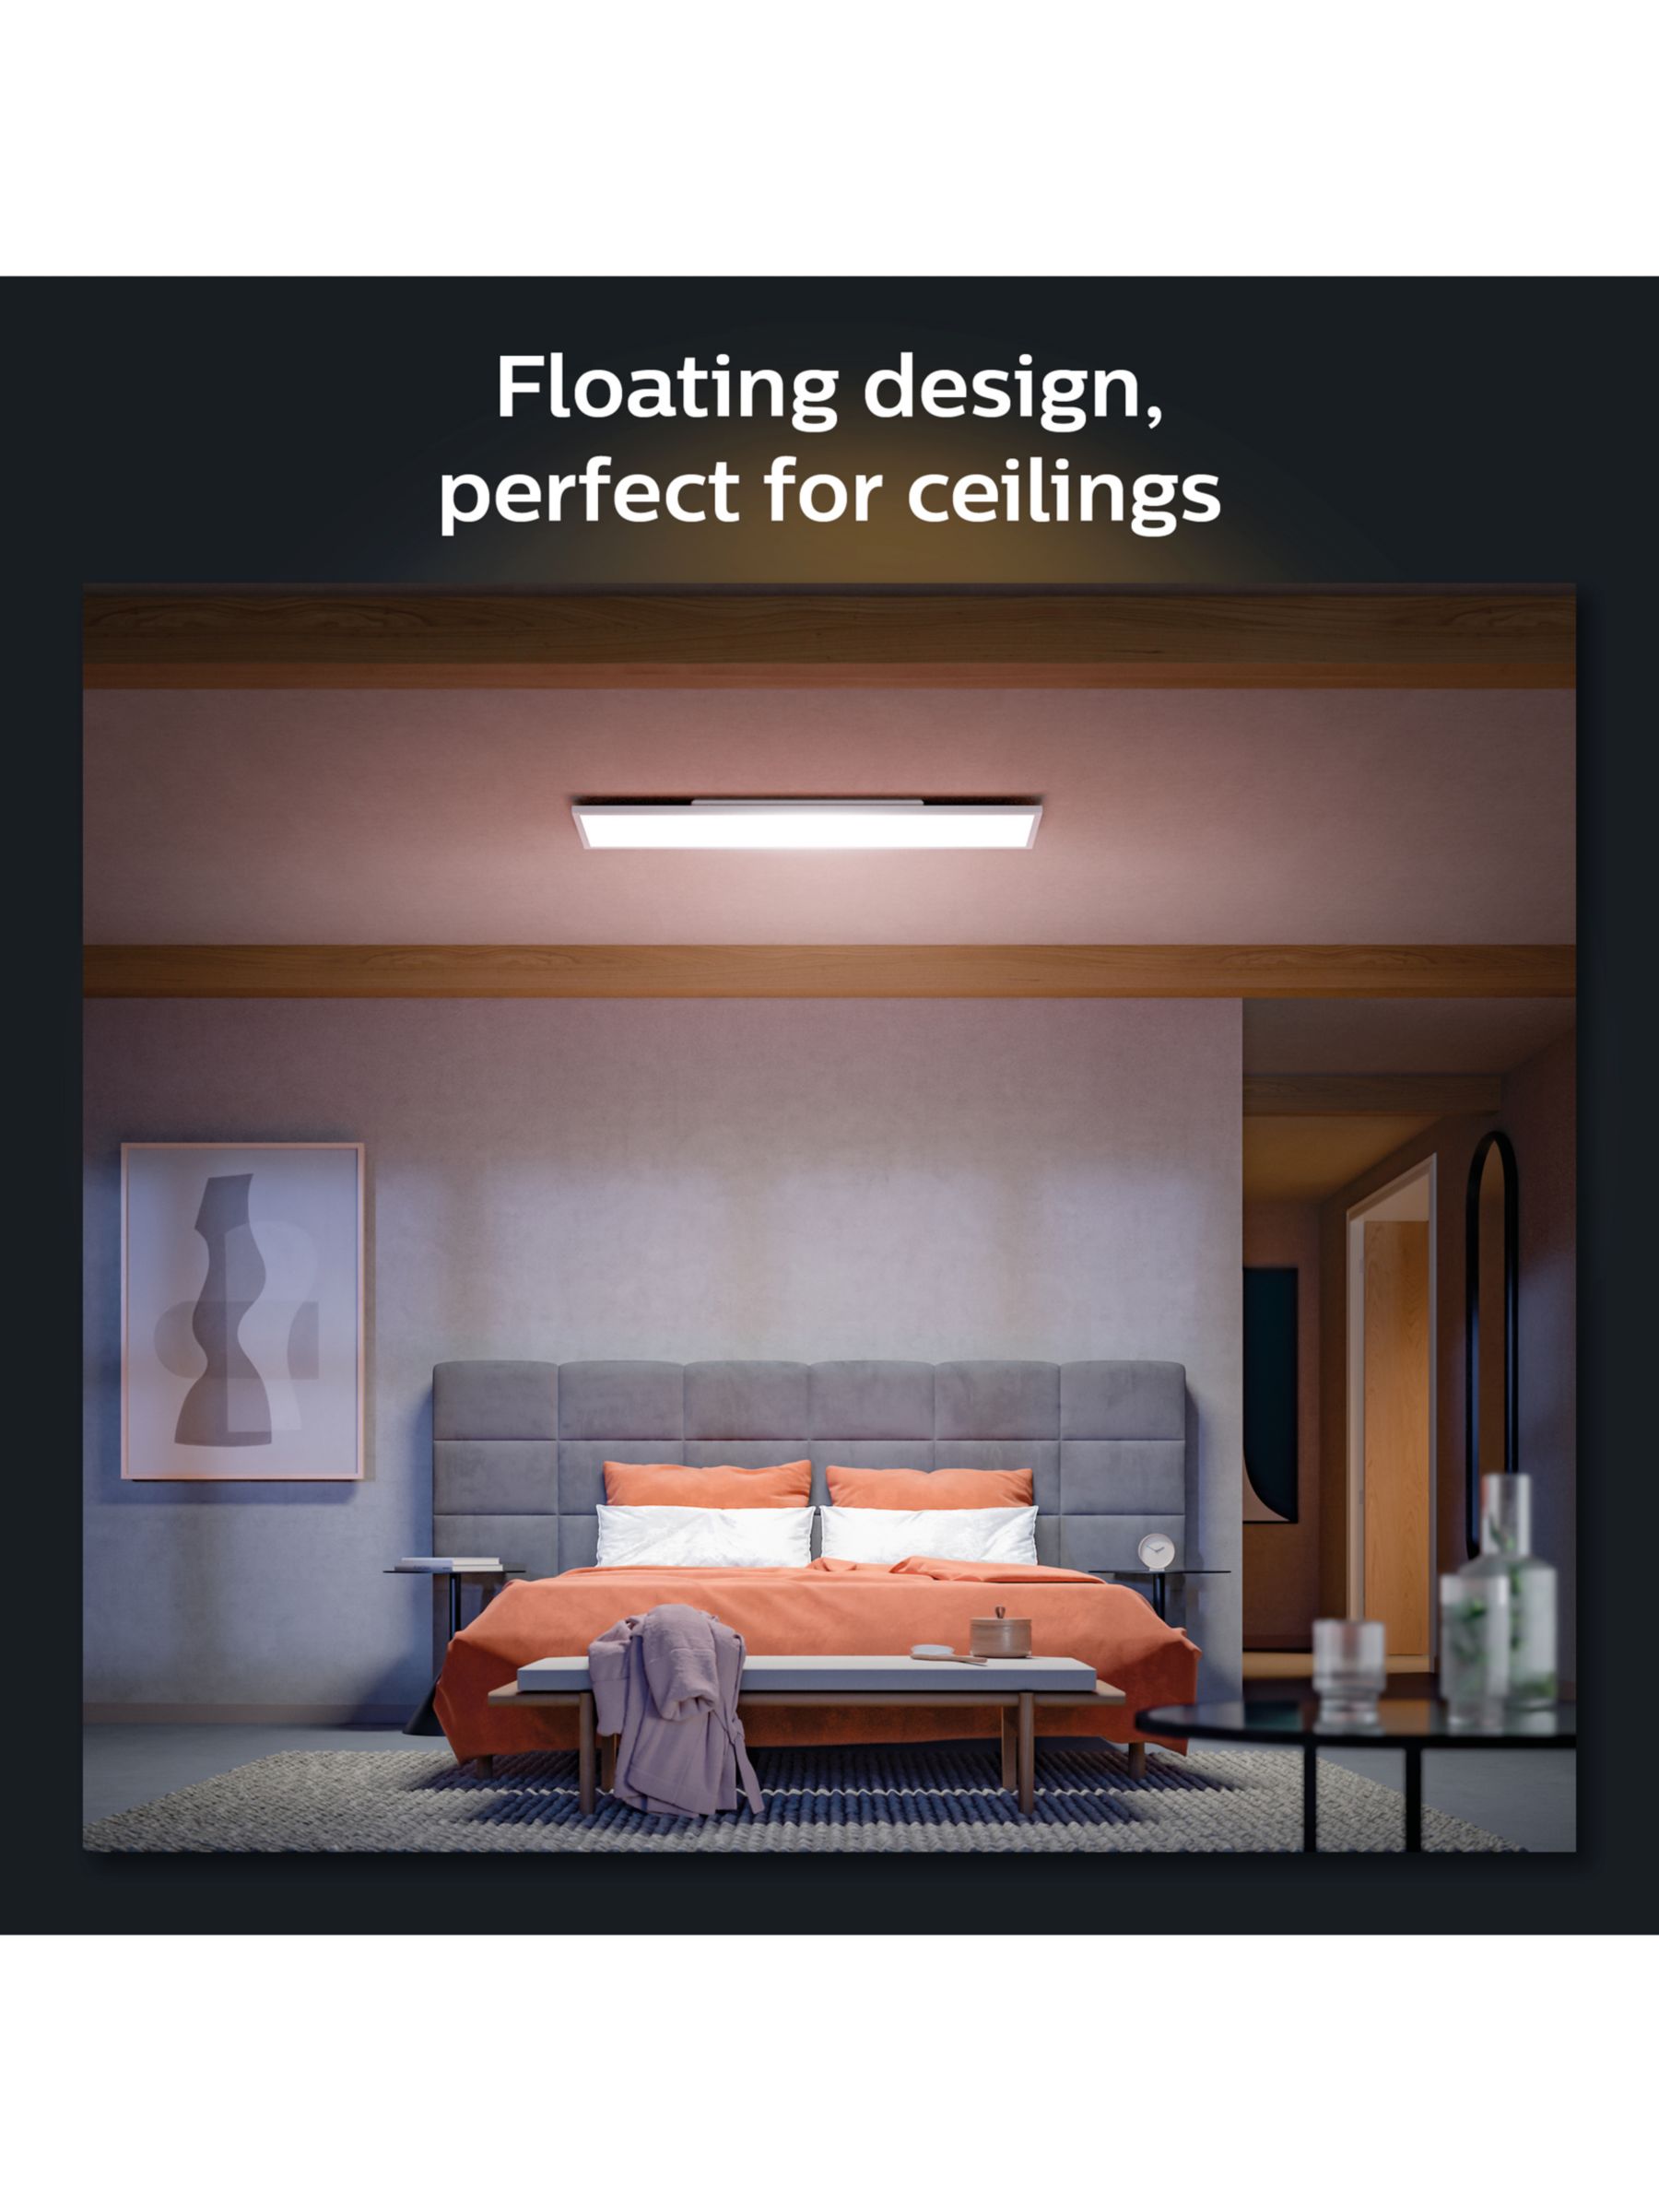 Philips Hue Surimu: Trying out the small ceiling light 